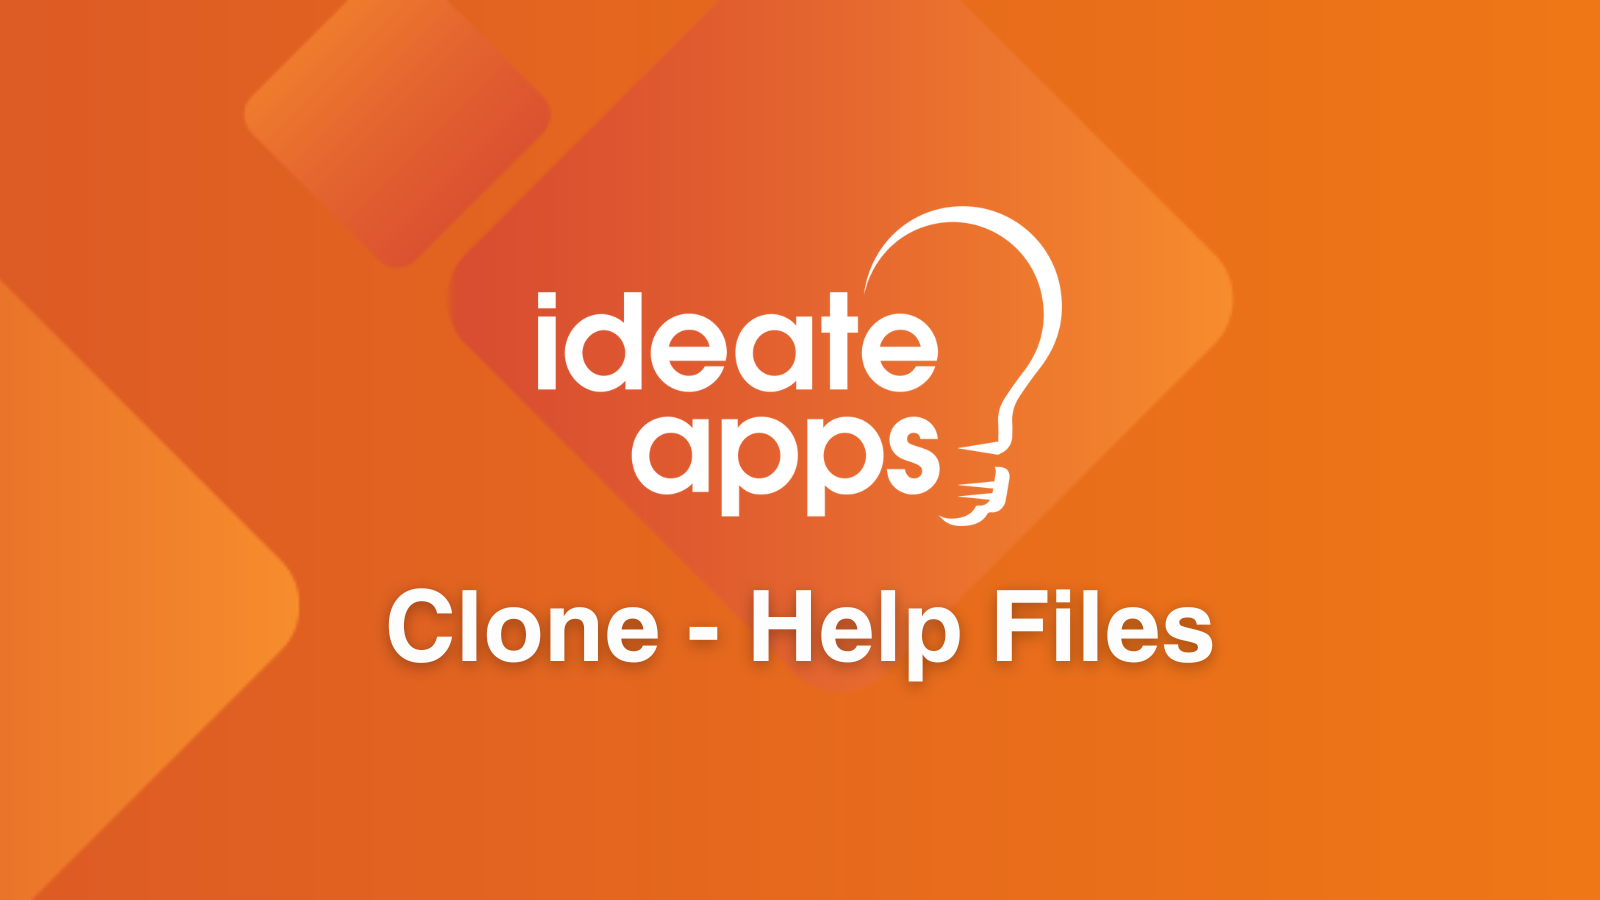 Search IdeateApps Clone Help Files